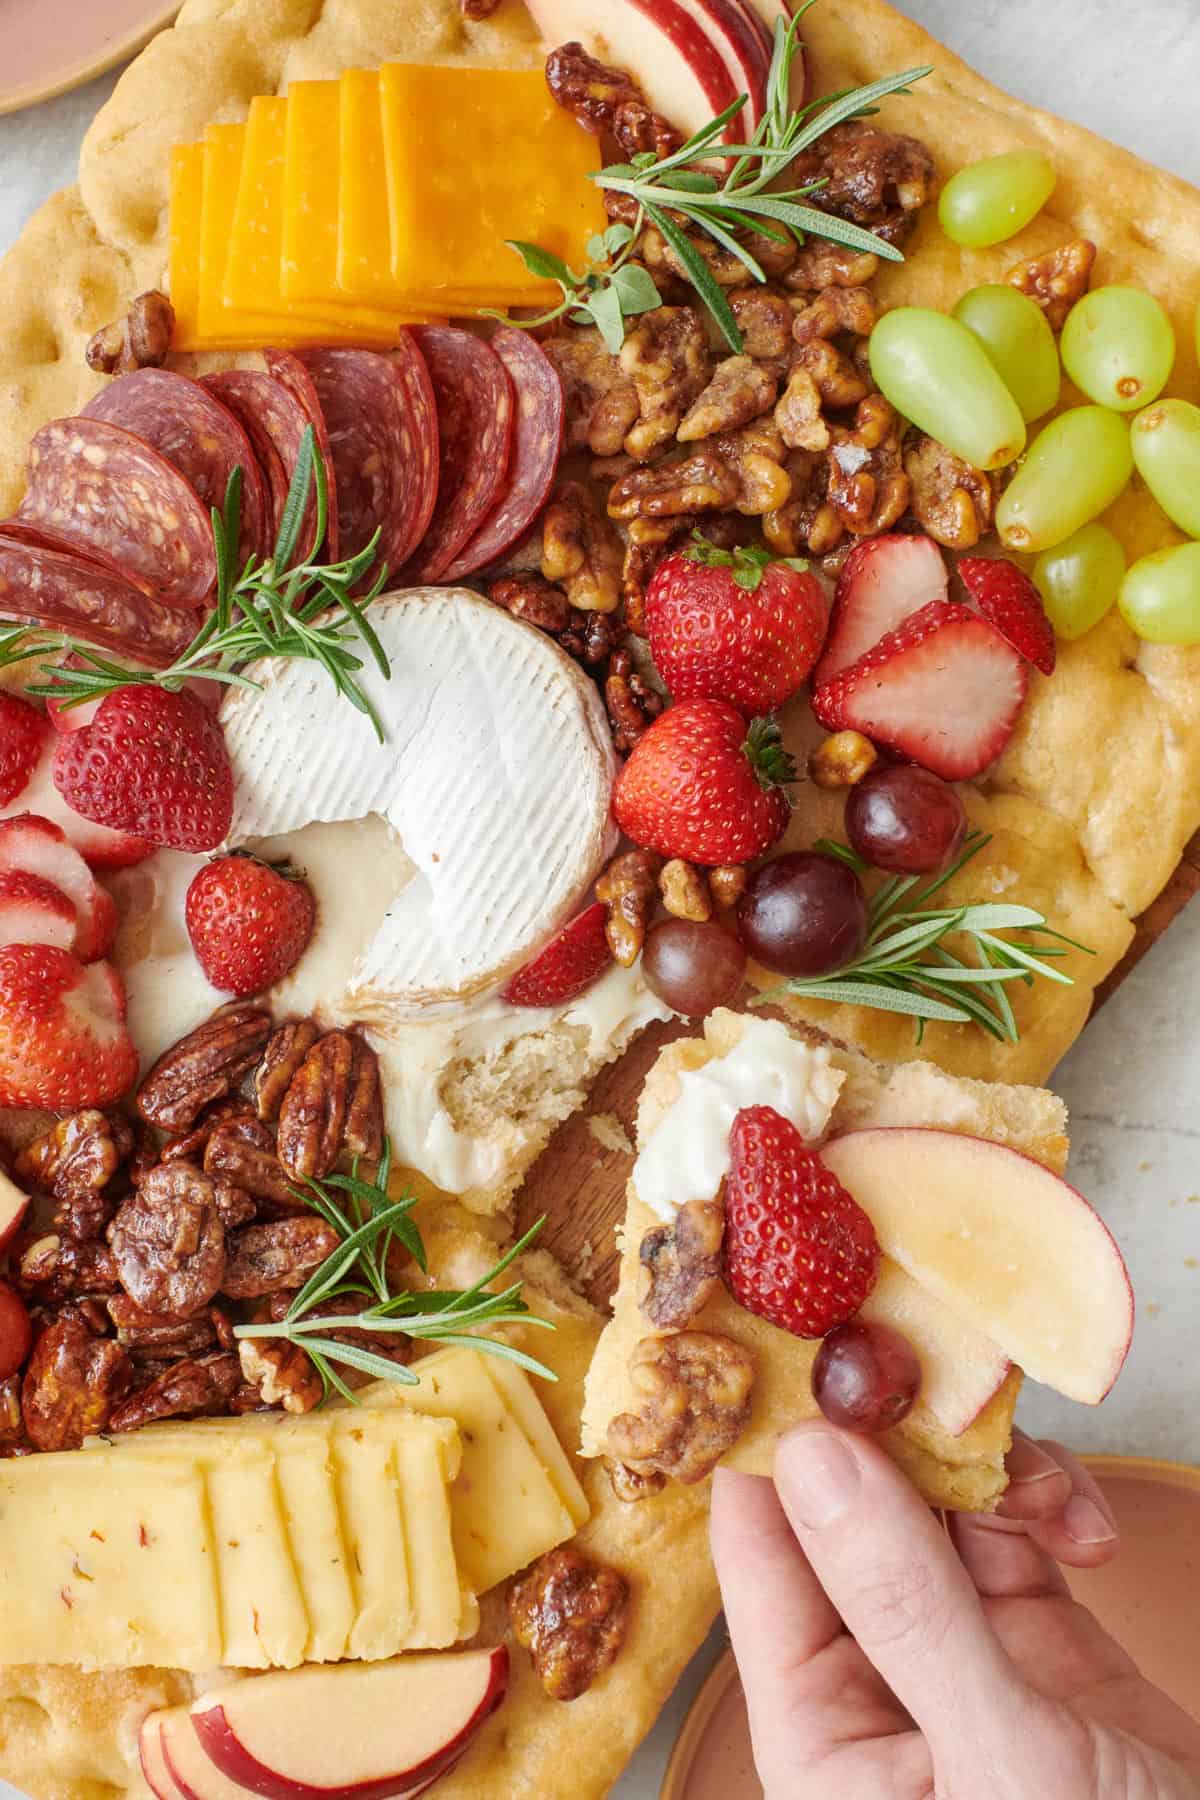 Baked brie focaccia charcuterie board filled with fresh fruit, nuts, cheeses, and deli meat with a hand lifting up a chip with some on it.